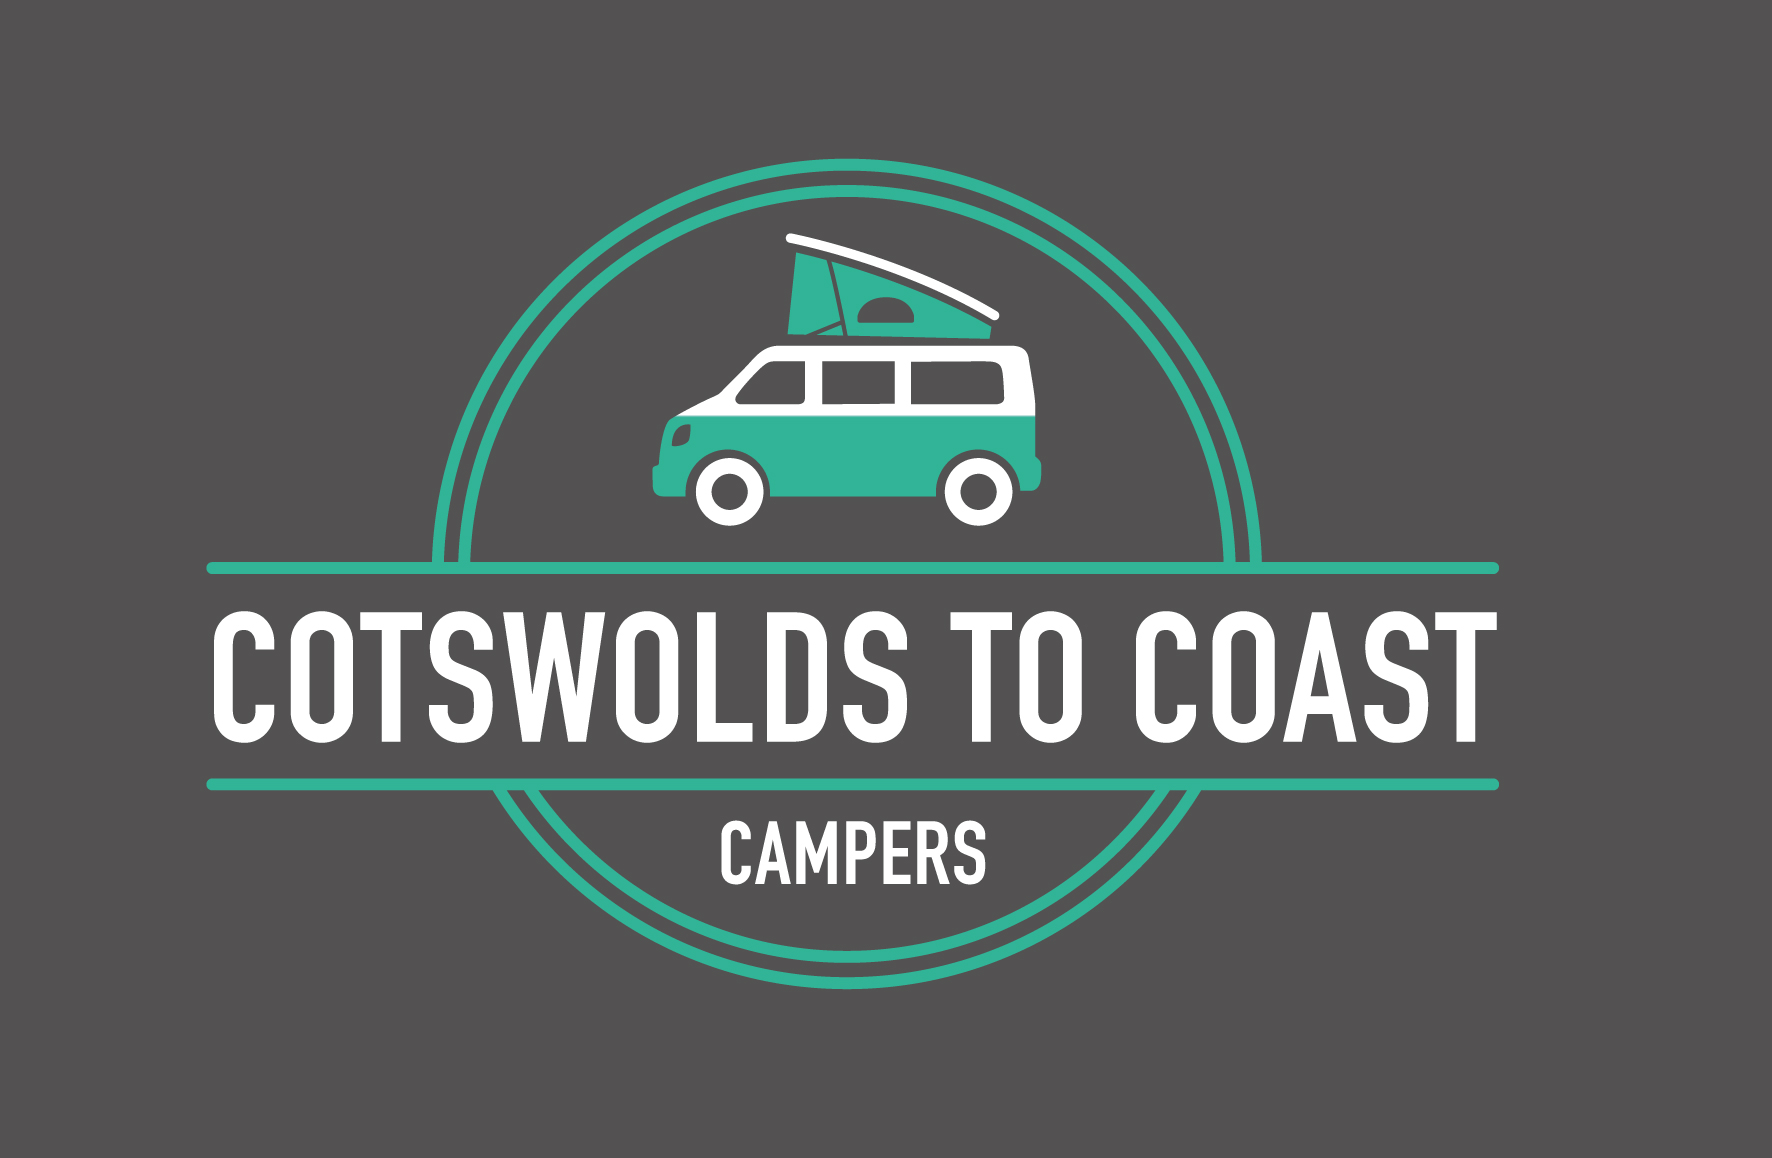 Cotswolds To Coast Campers